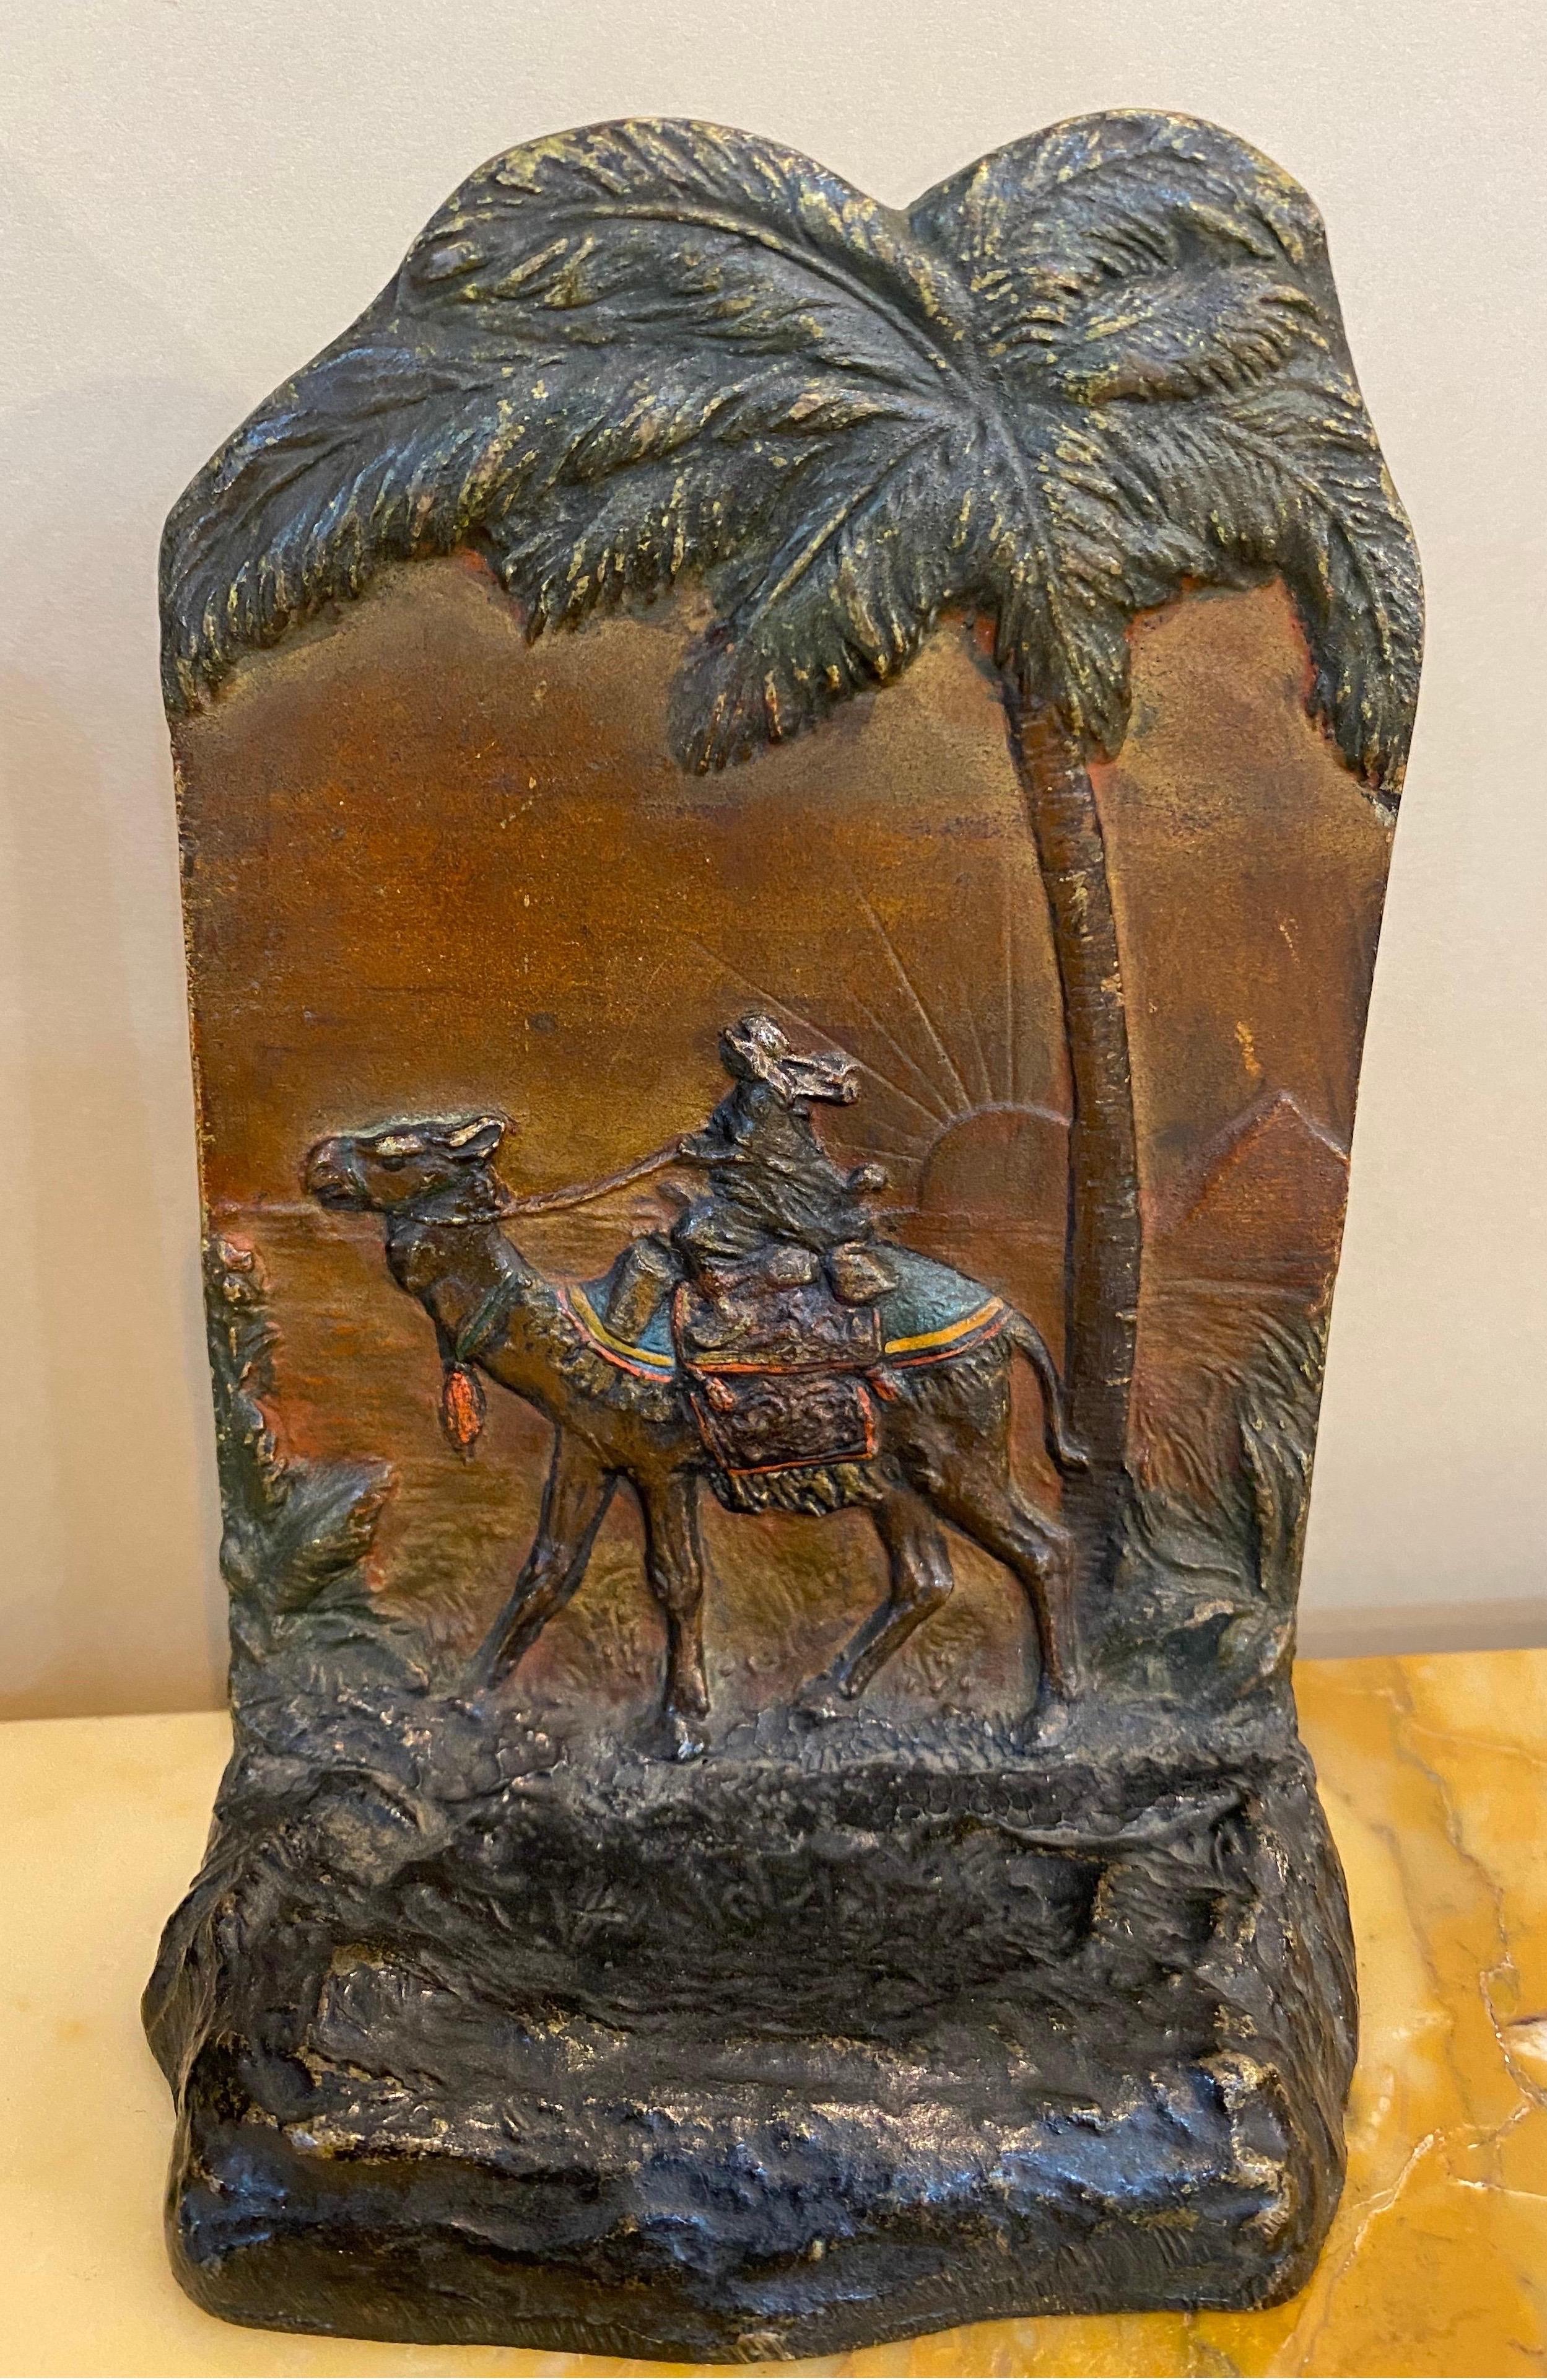 Pair of late 19th-early 20th century cold painted Austrian polychrome bookends of Arabian merchants, palm trees and pyramids in the background.